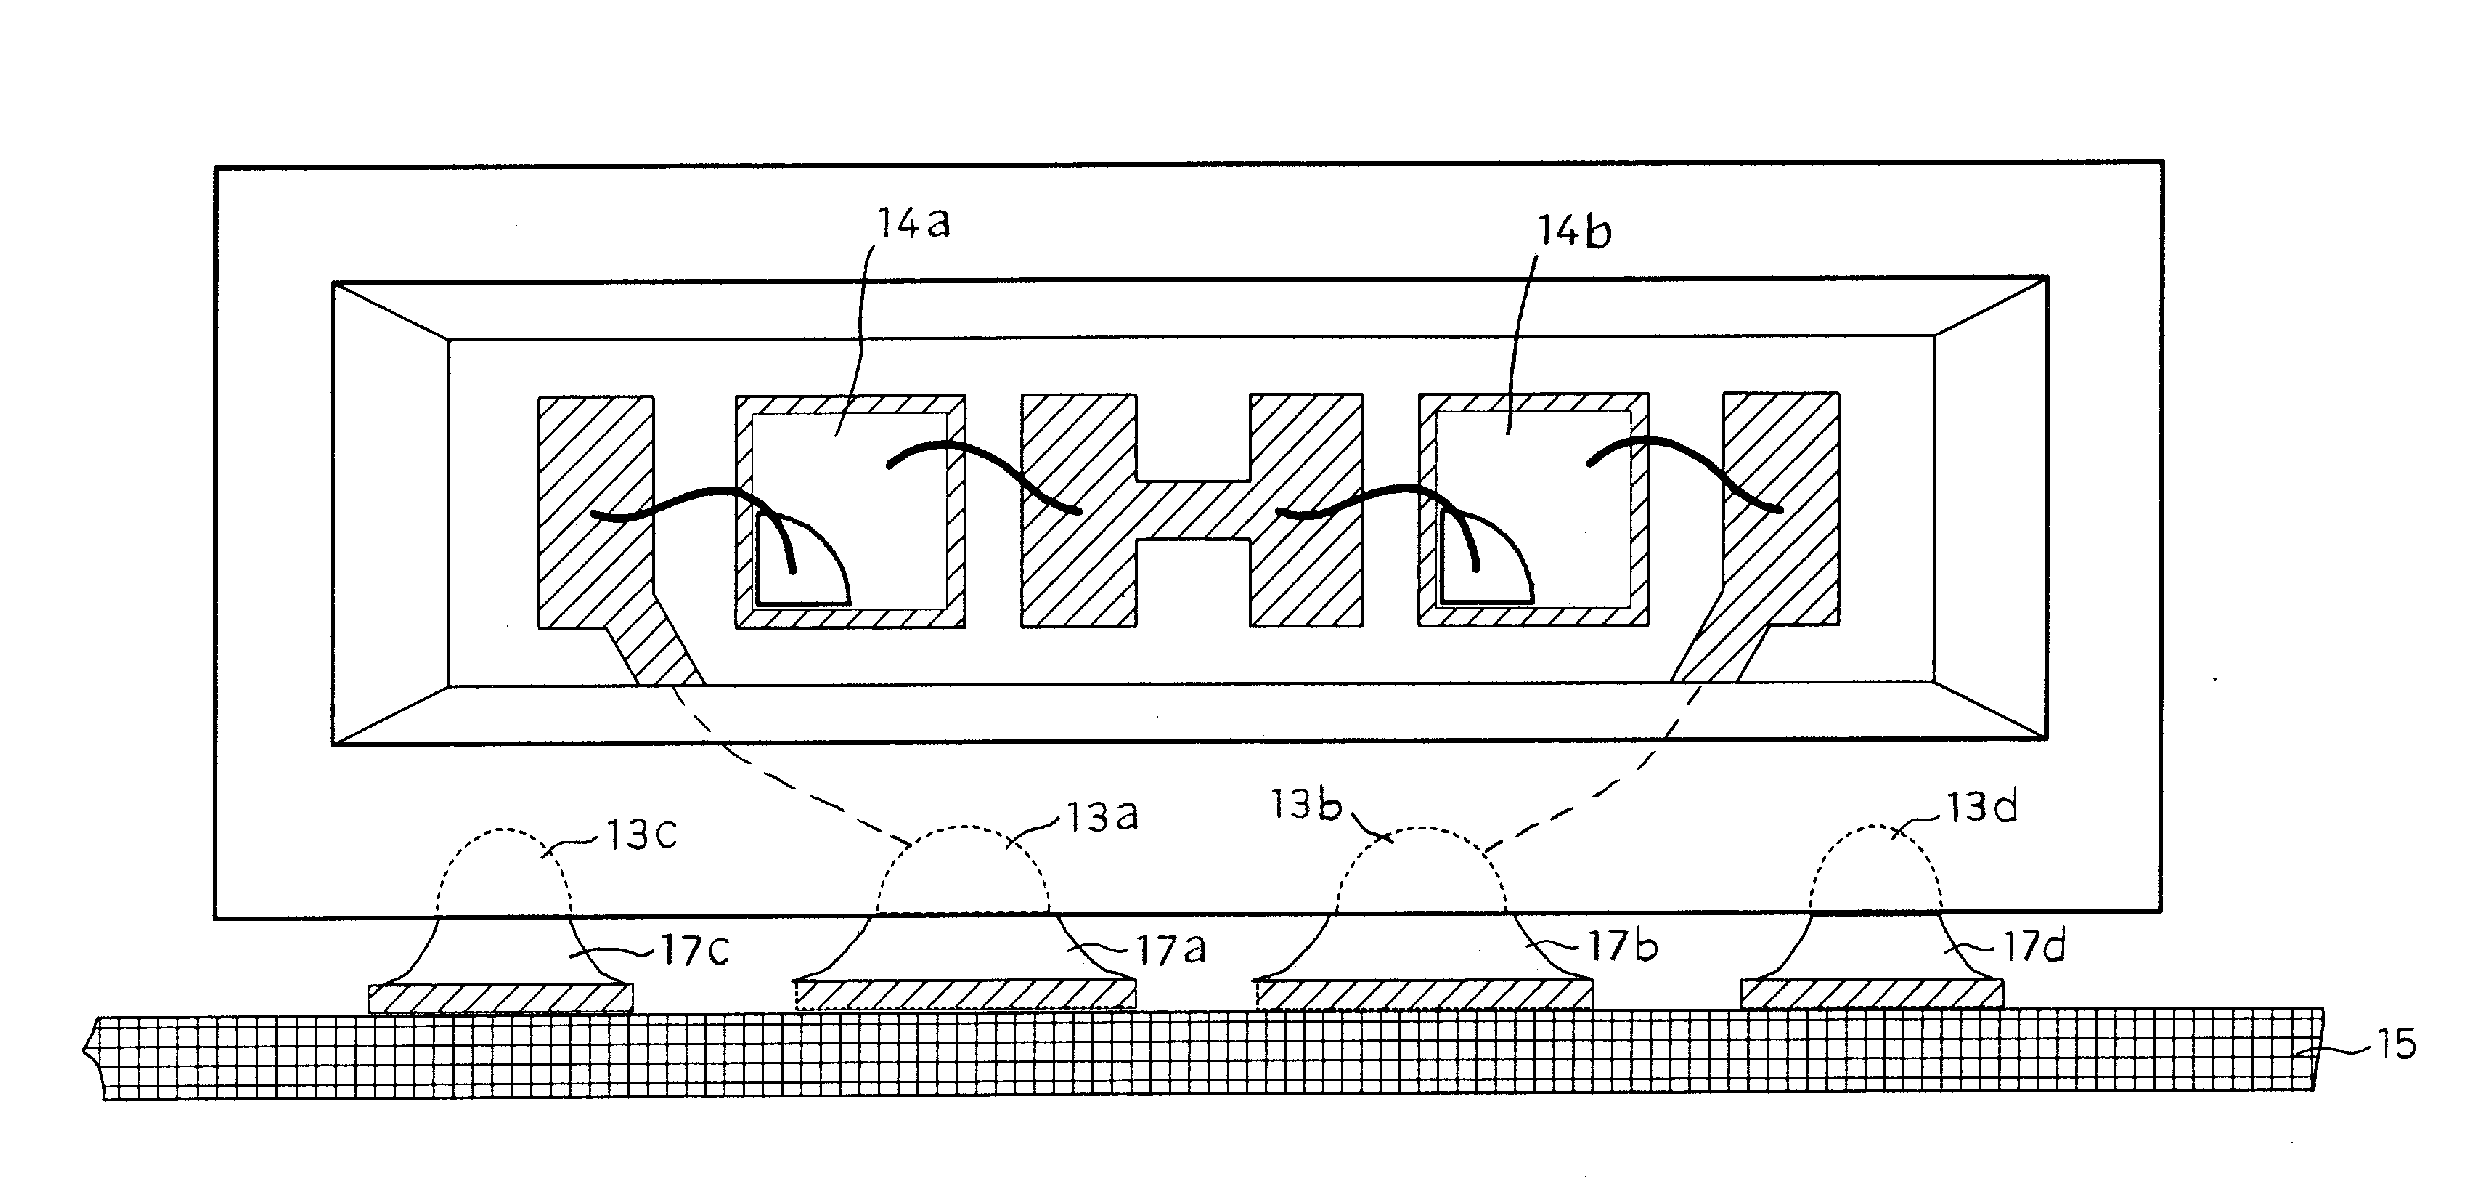 Surface mount device